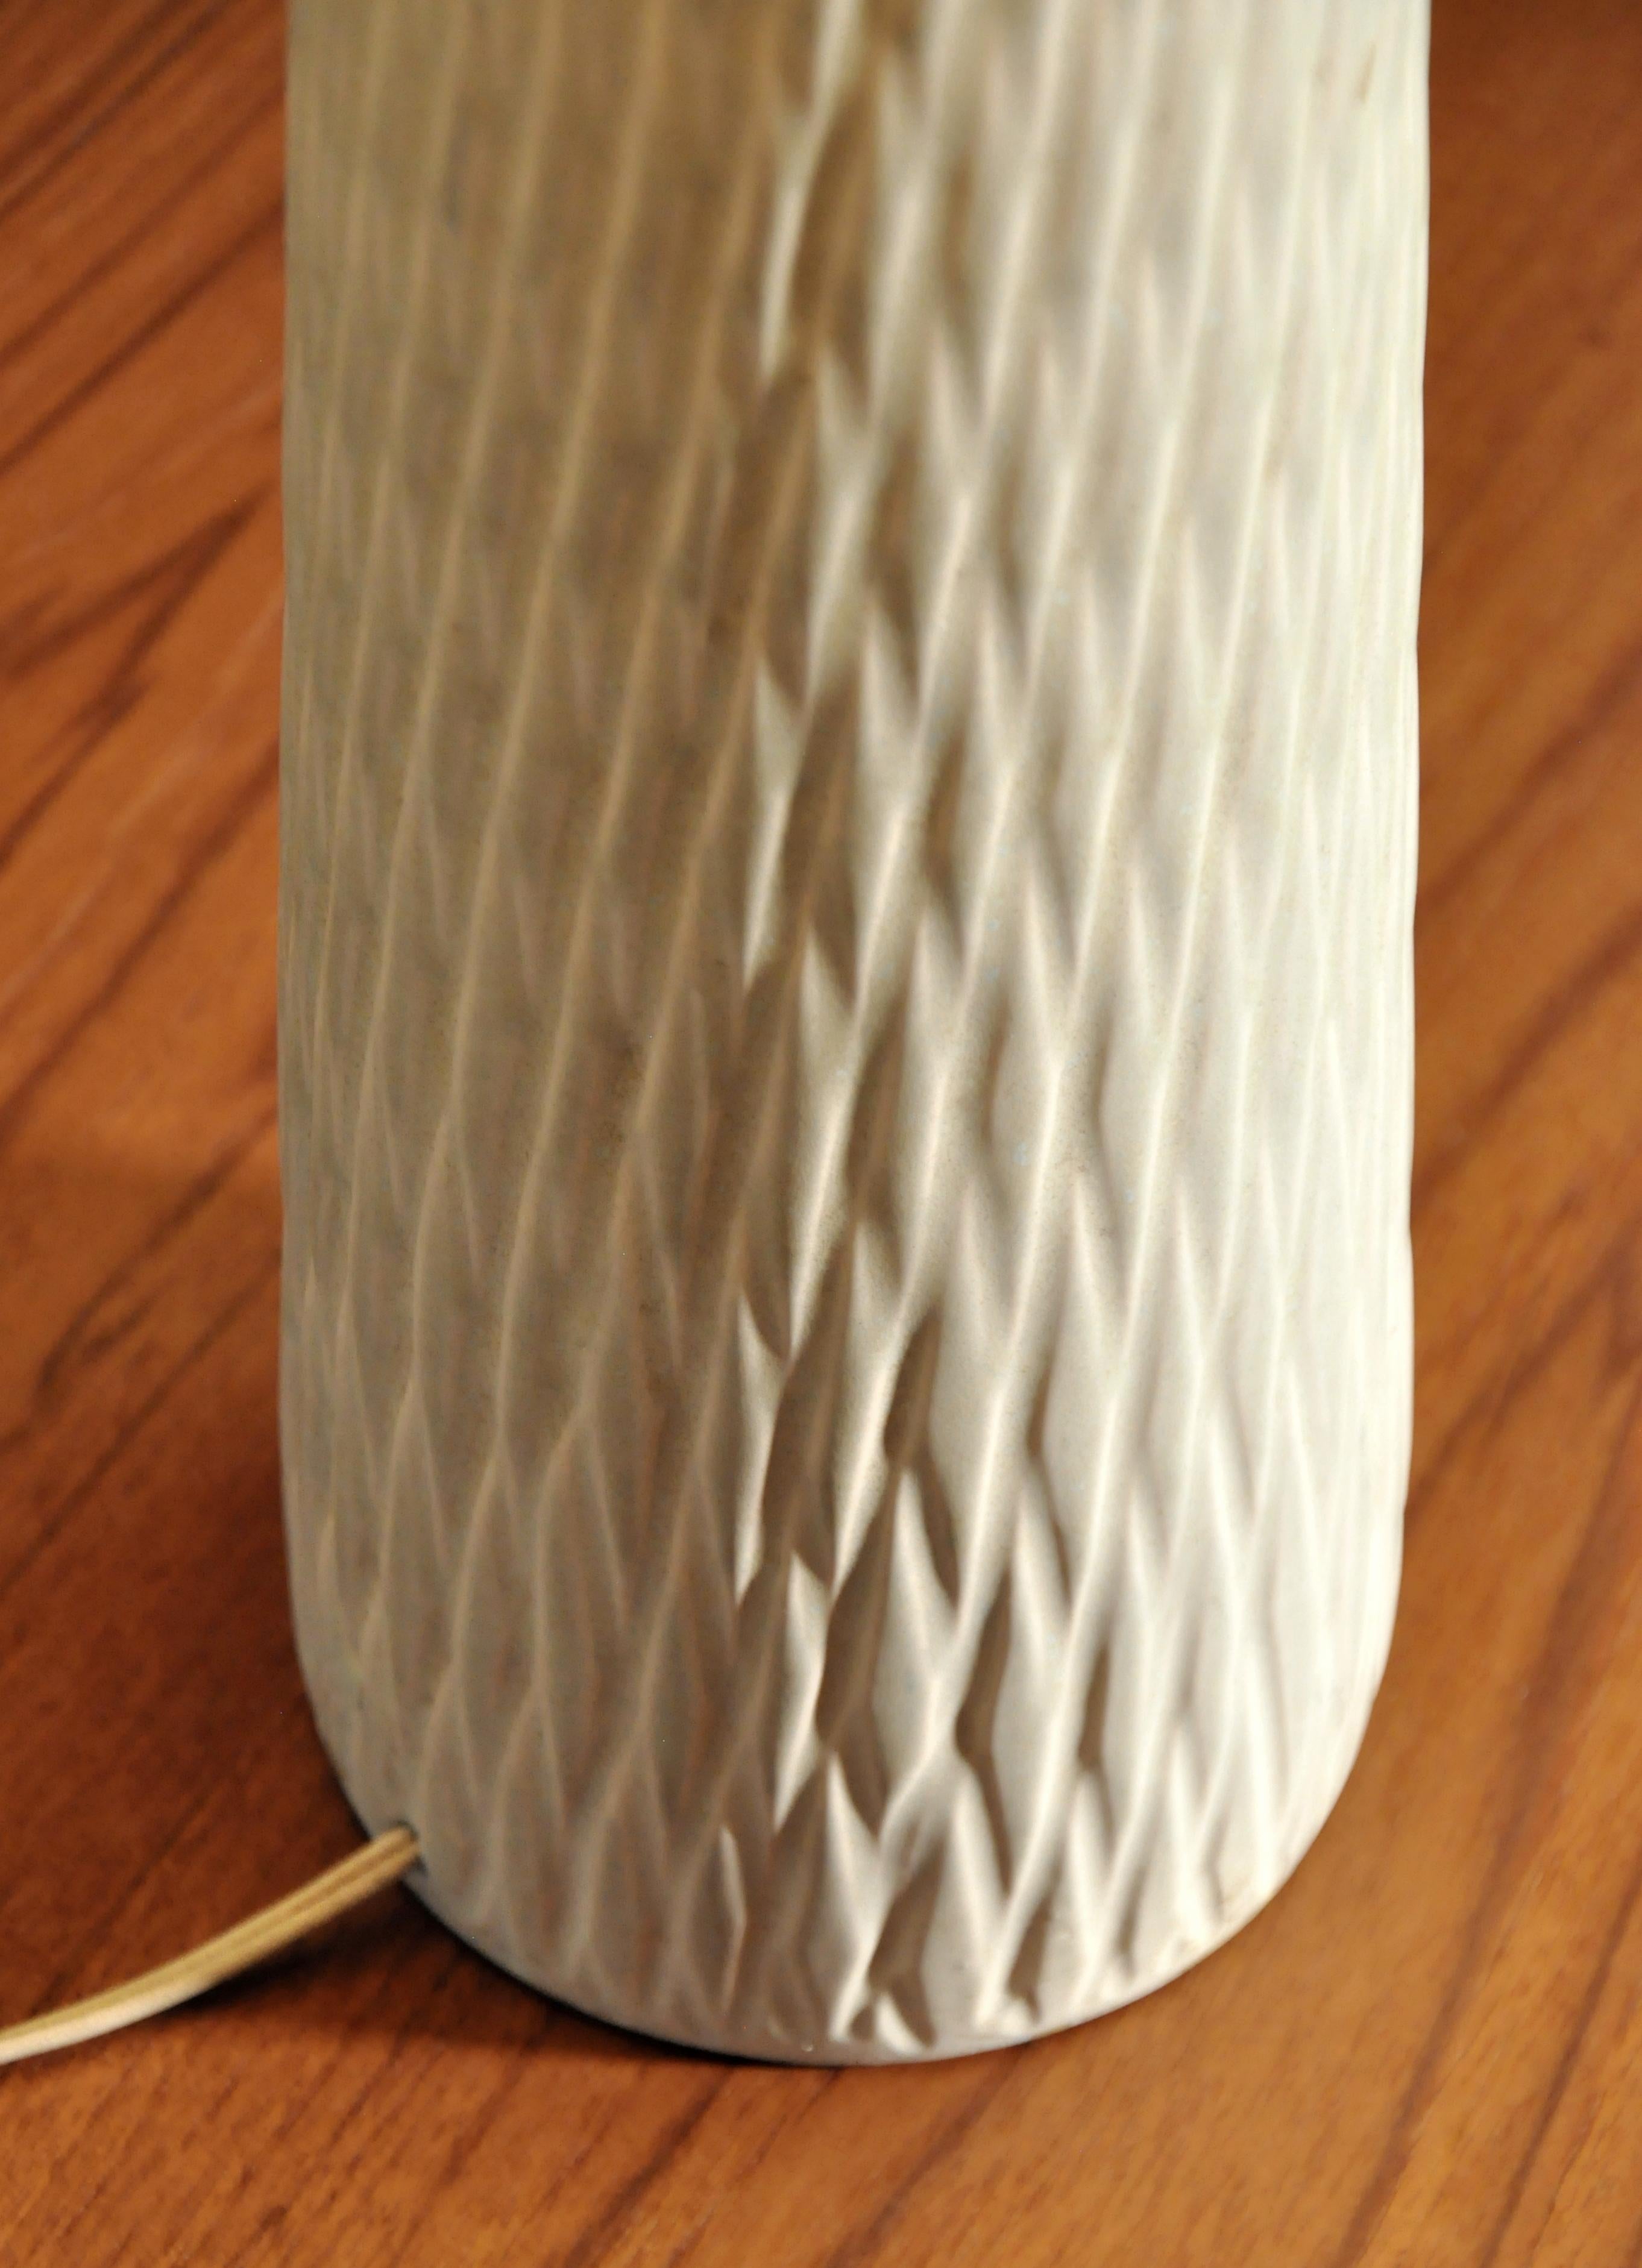 An off-white ceramic table lamp, dating from the late 1950s, attributed to Lotte & Gunnar Bostlund. The tall, vintage earth tone lamp features a creamy ivory colored body with a hand carved beehive pattern and a beige jute shade. Works well with